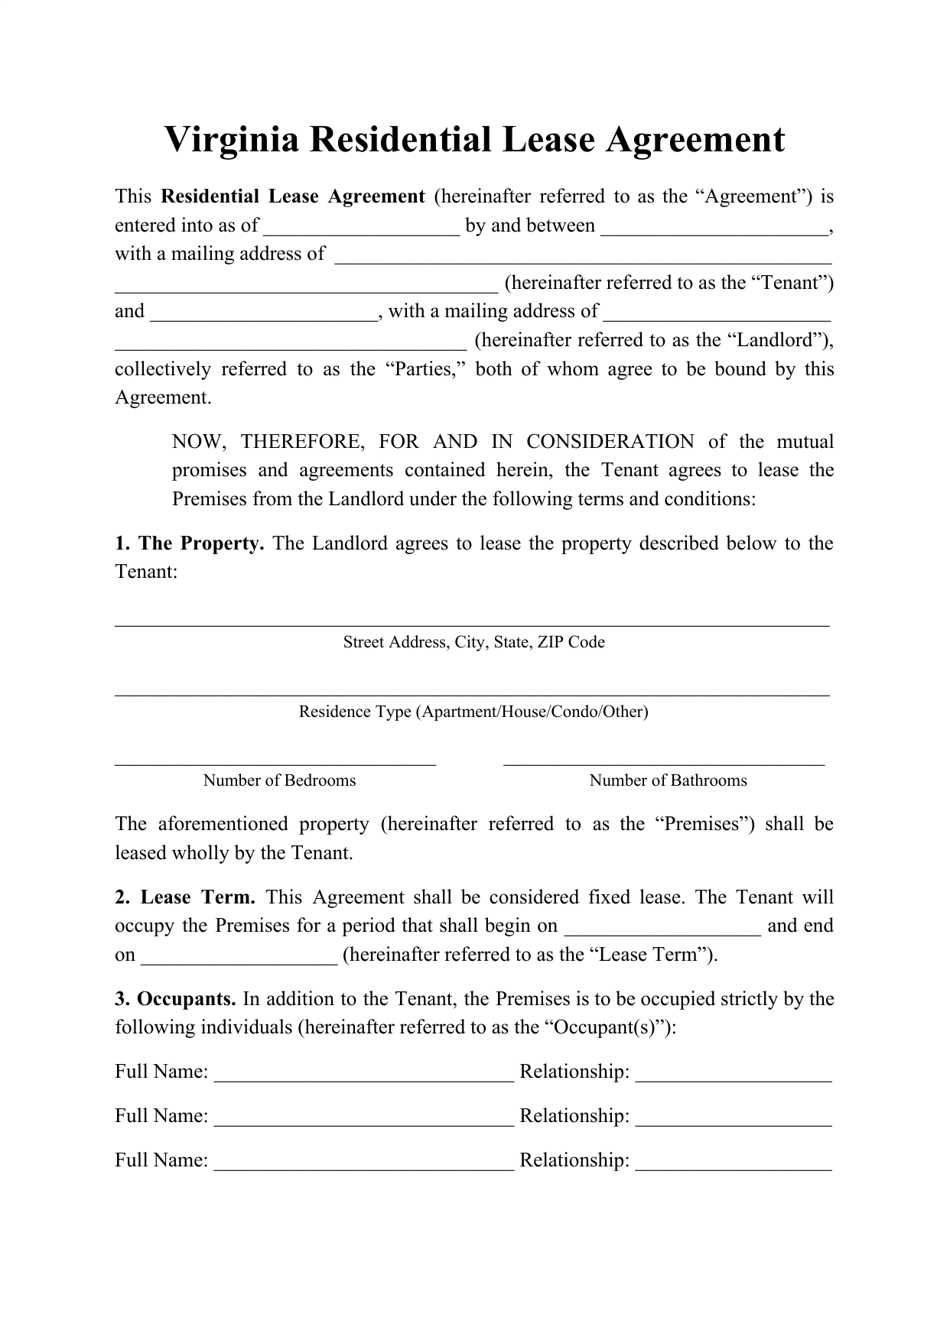 Residential Lease Agreement Template - Virginia, Page 1